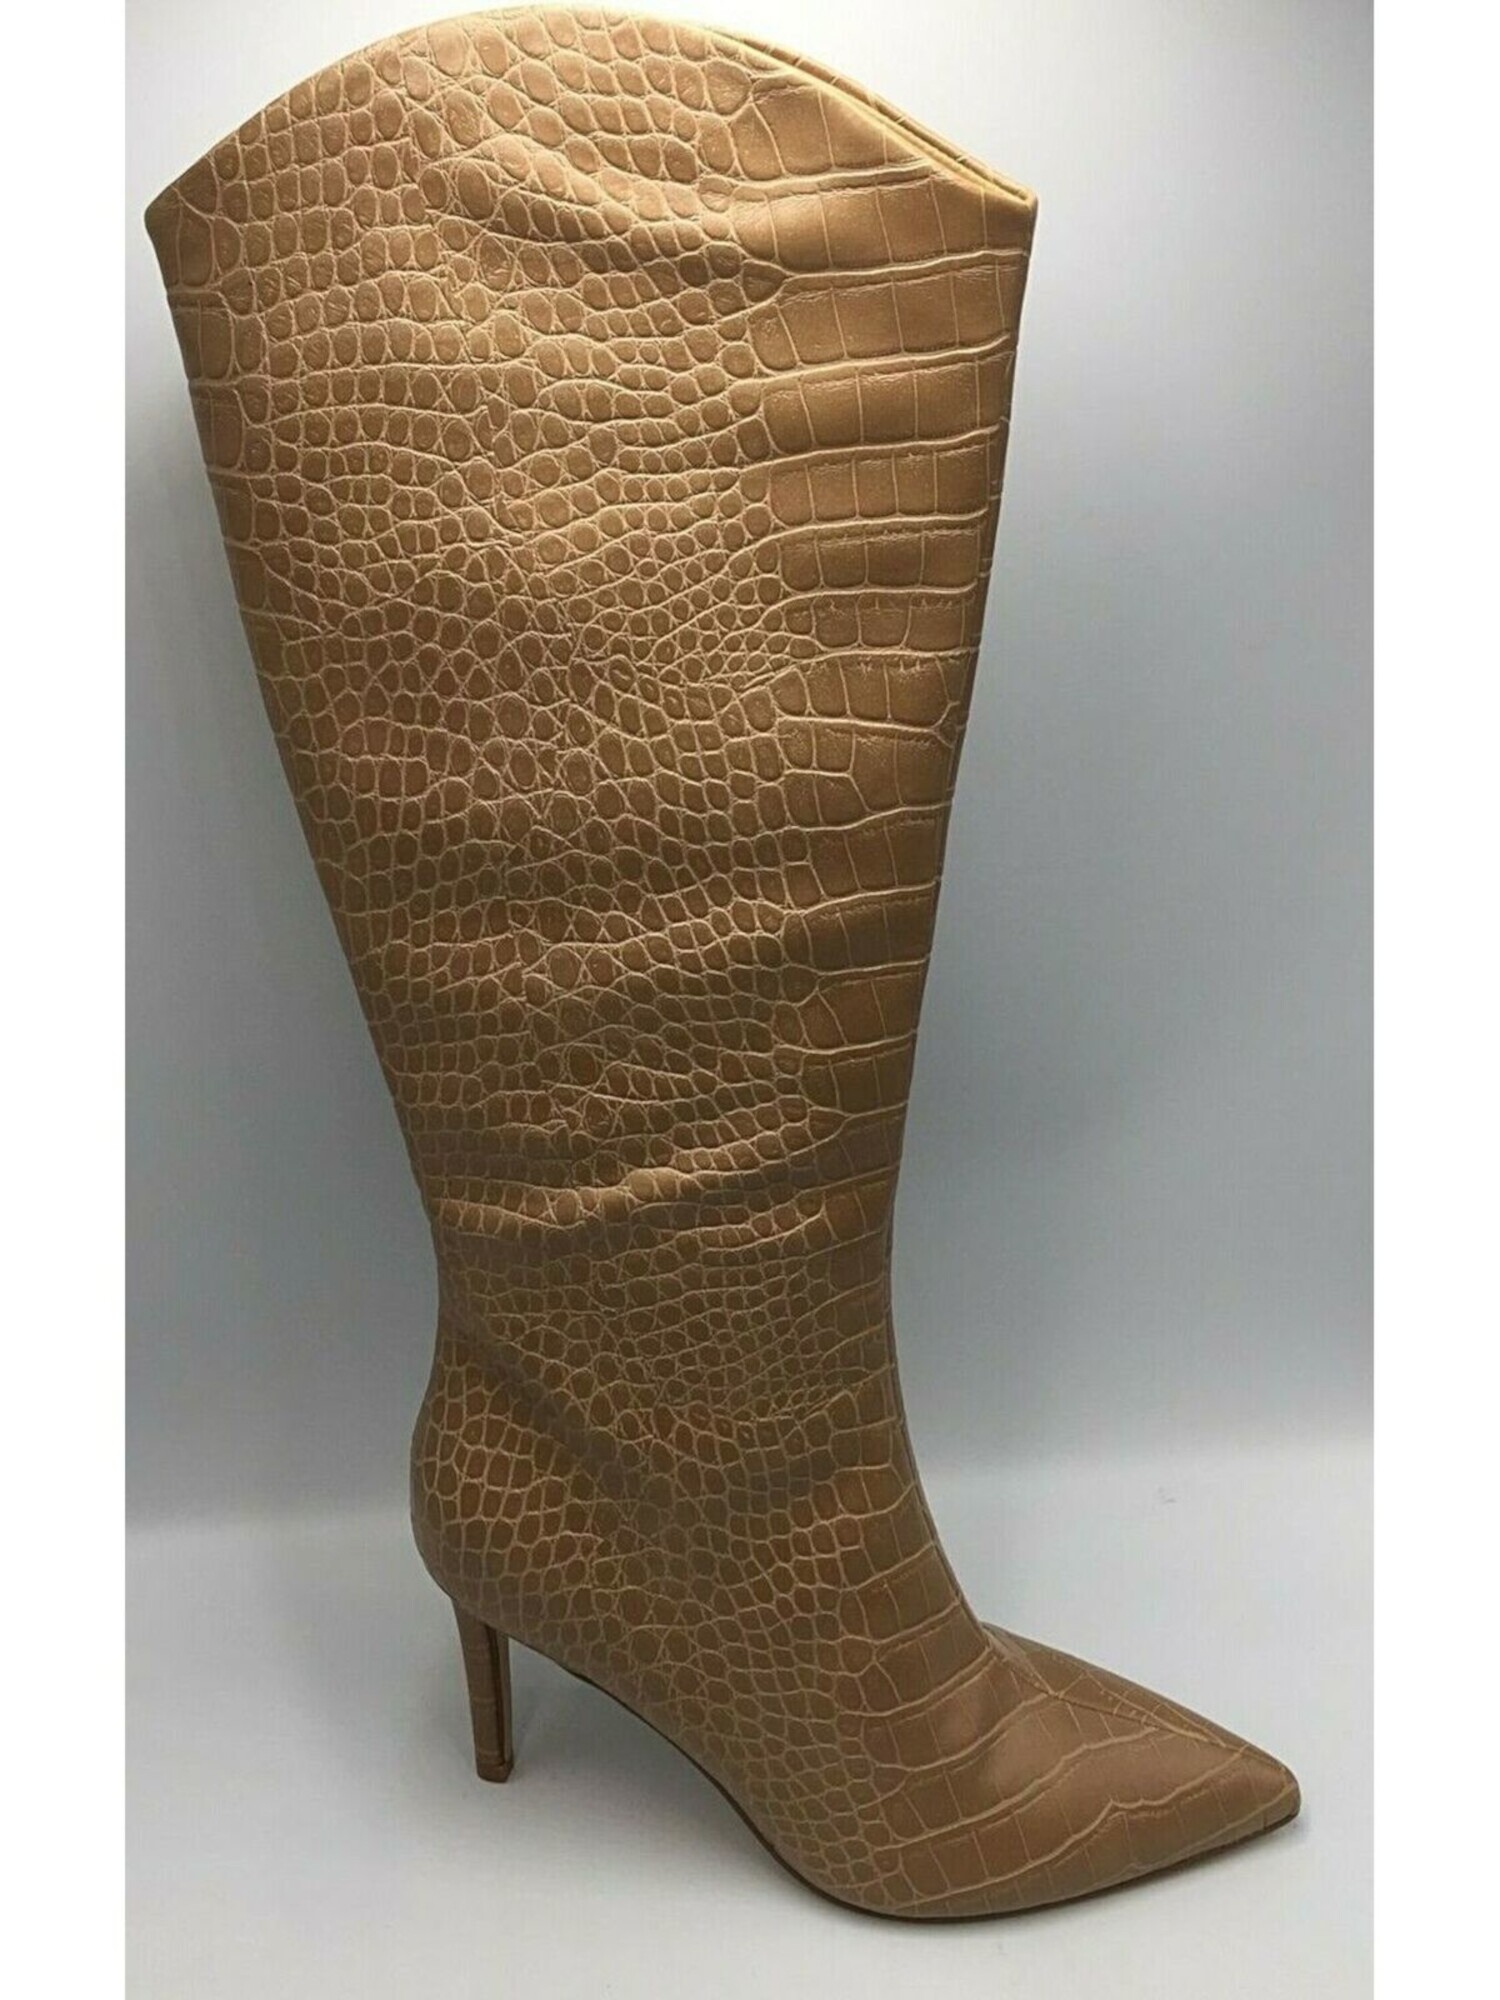 NINE WEST Womens Brown Snake Print Comfort Cushioned Erli Pointed Toe Stiletto Zip-Up Dress Boots 6.5